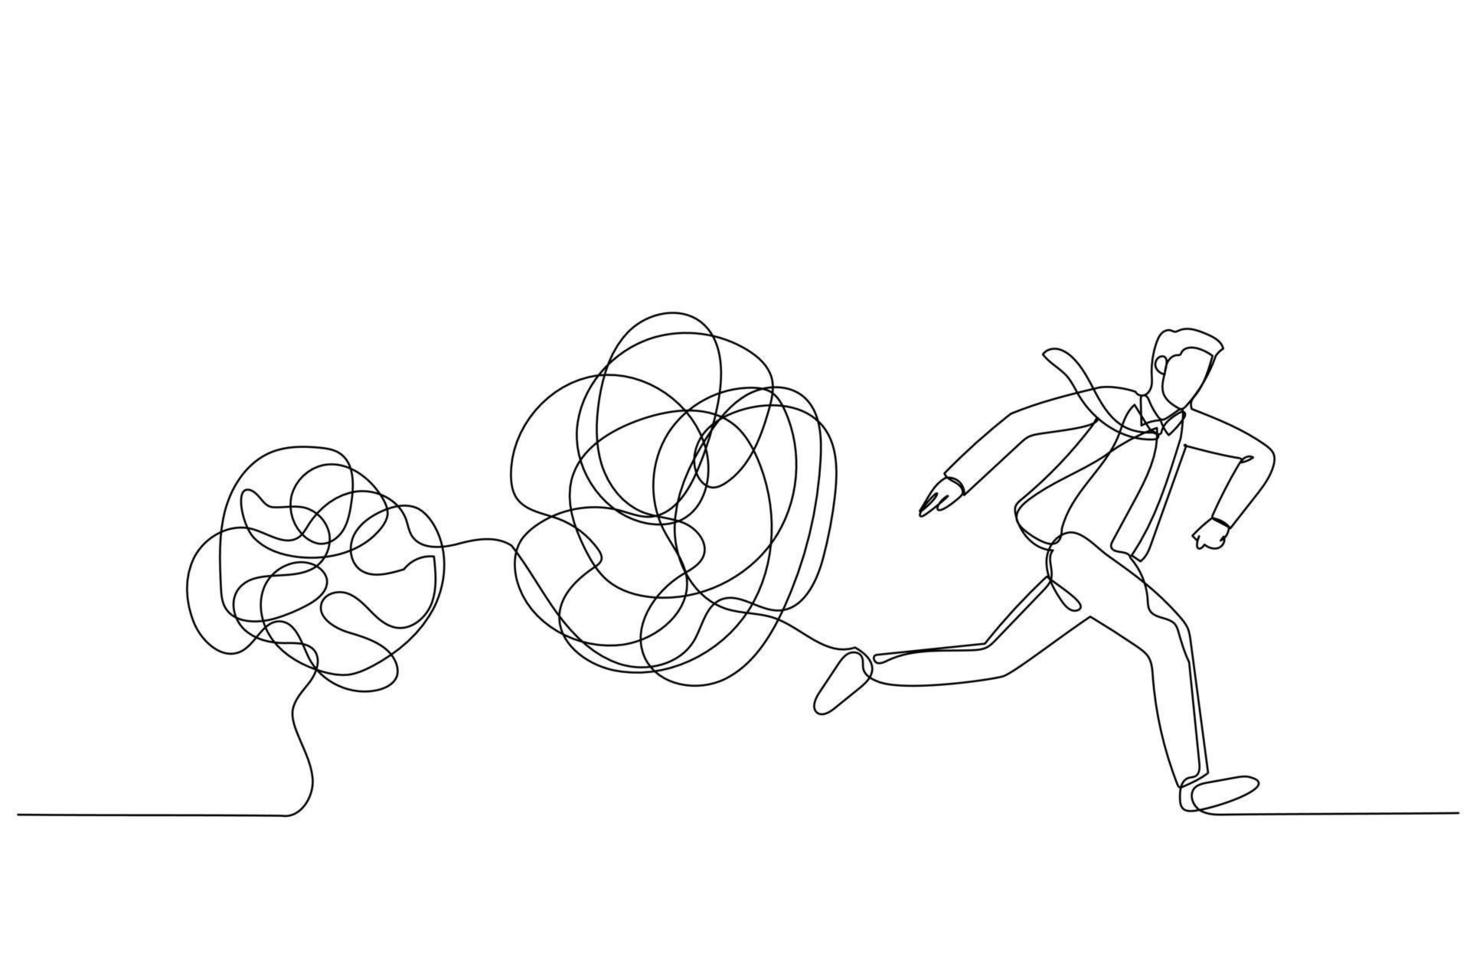 Drawing of businessman running away from tangled line ball concept of avoid problem. Single continuous line art style vector